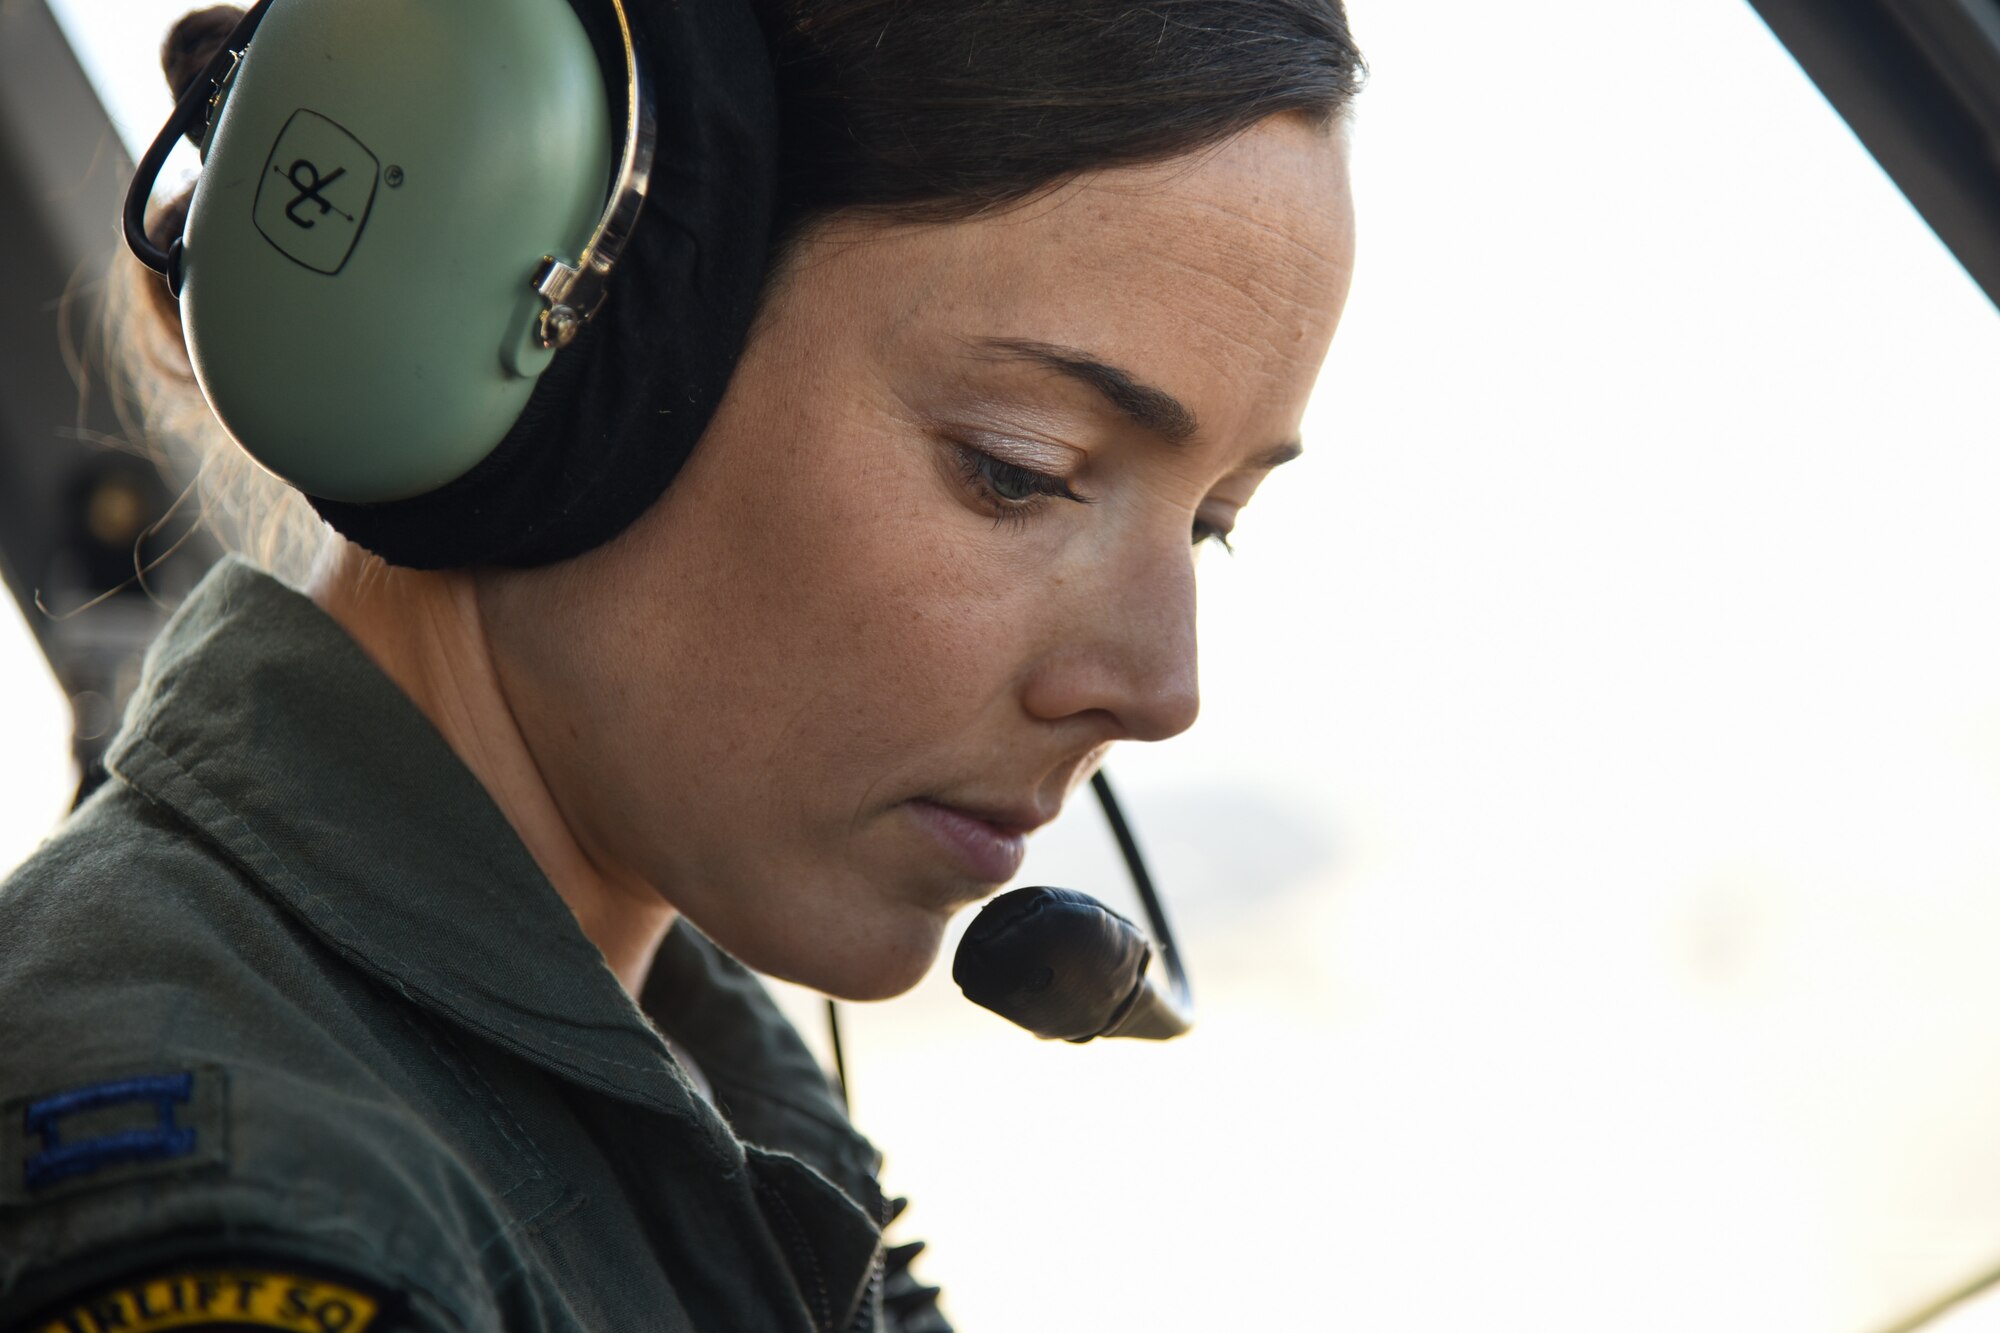 Capt. Jamie LaRivee, 21st Airlift Squadron C-17 Globemaster III pilot, simulates aircraft procedures at Travis Air Force Base, Calif., March 14, 2017. LaRivee's mother was in the first class of female cadets at the Air Force Academy. (U.S. Air Force photo by Senior Airman Sam Salopek)